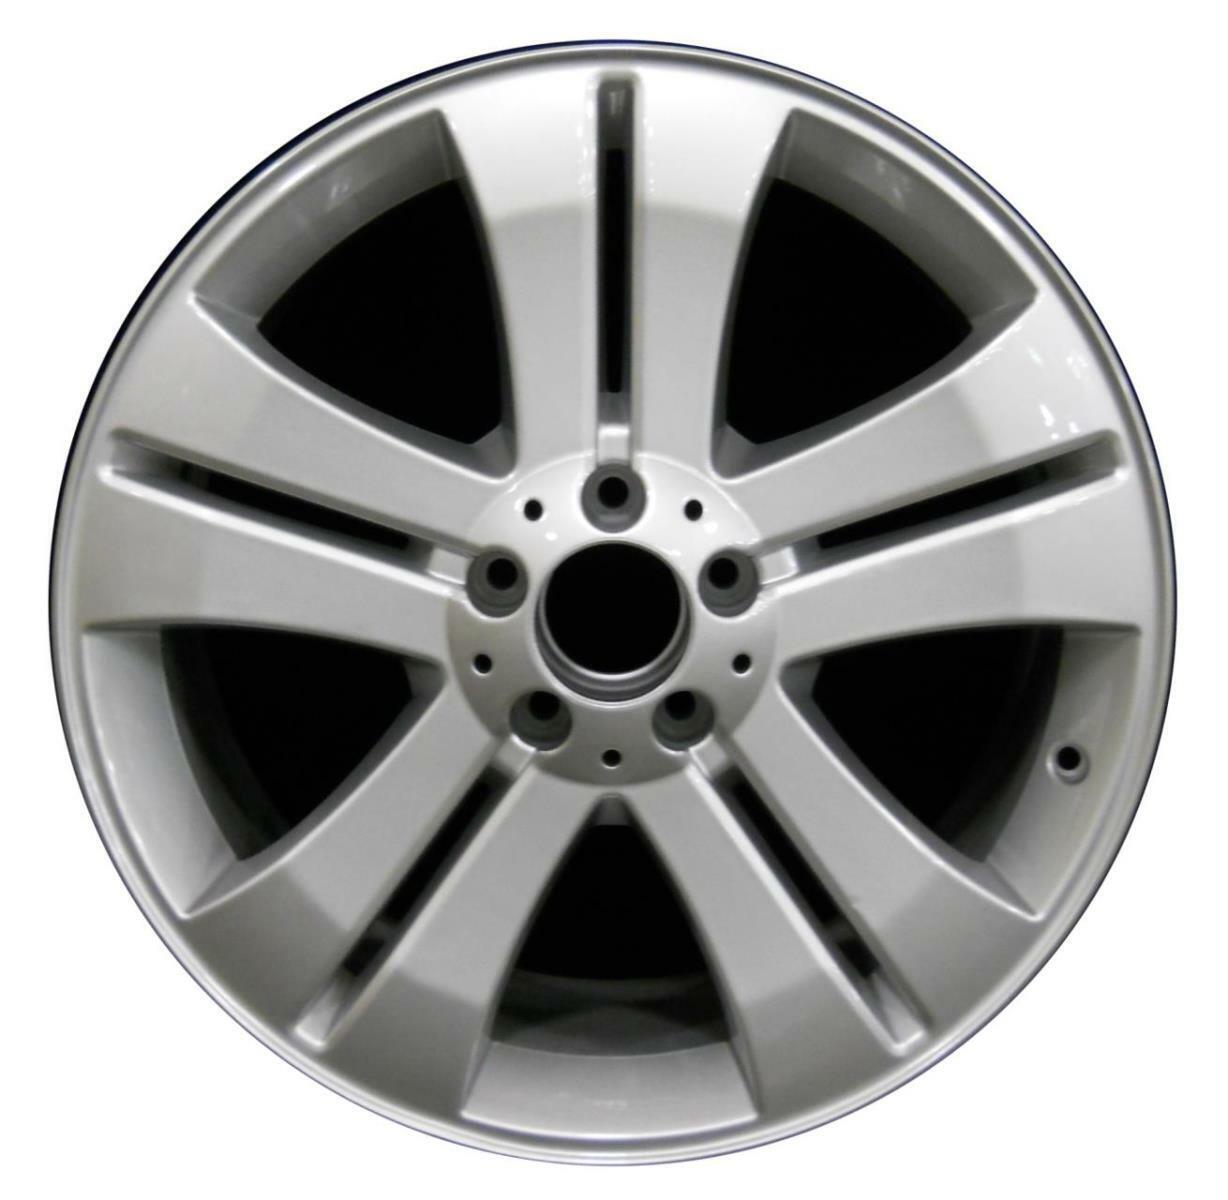 (1) Wheel Rim For Mercedes Gl-Class Recon OEM Nice Silver Painted